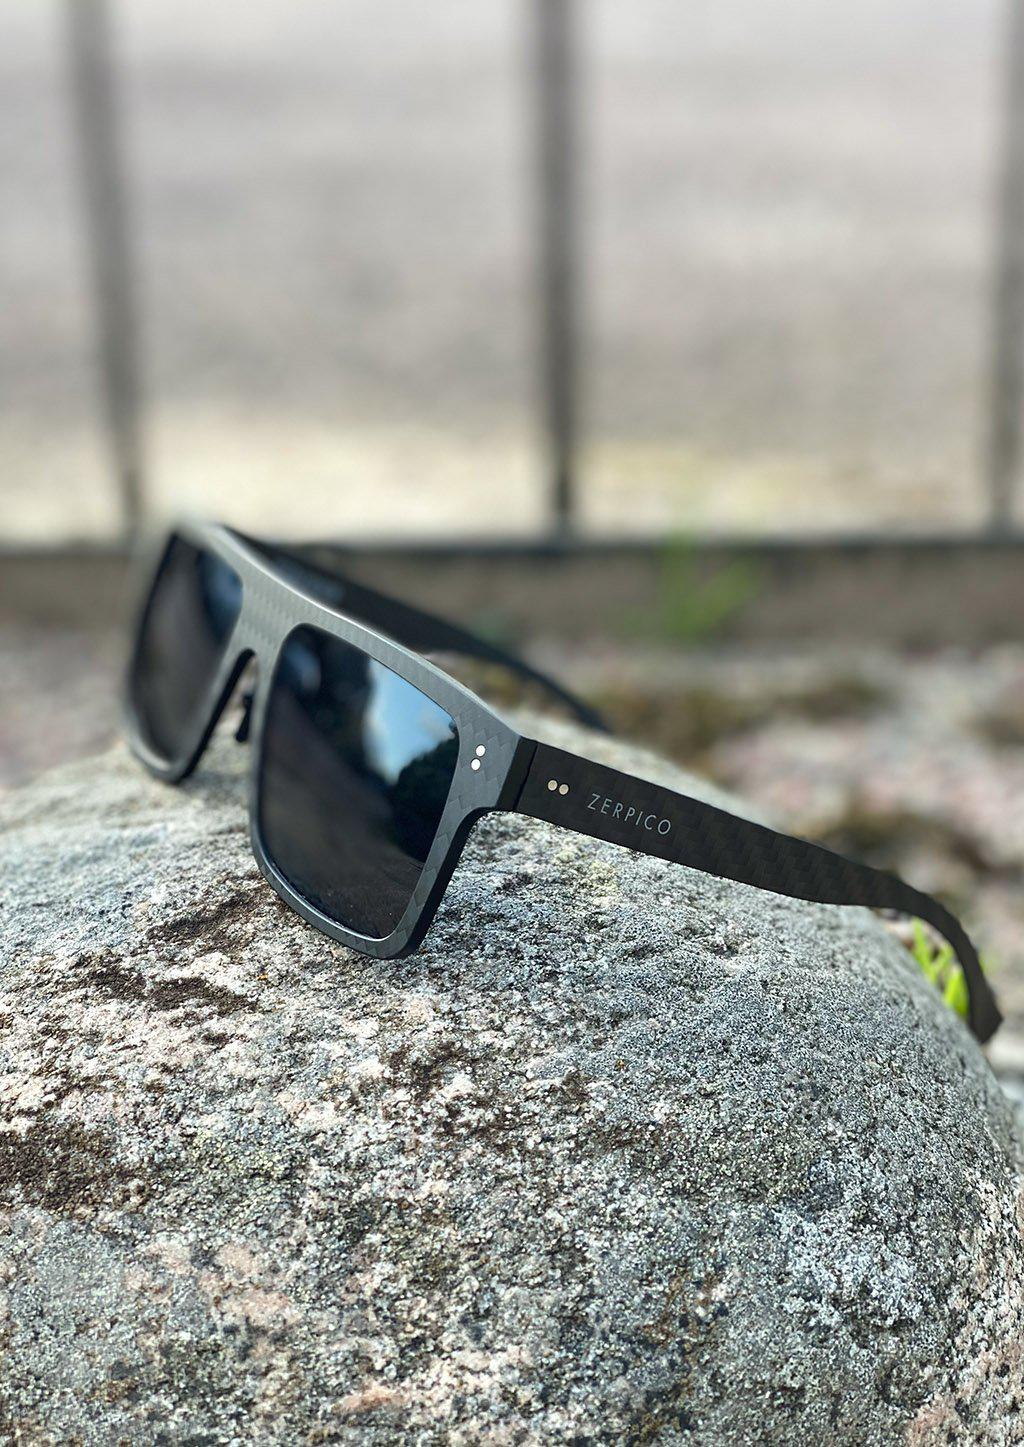 Carbon Fiber Square Sunglasses, another photo from outside from the side.